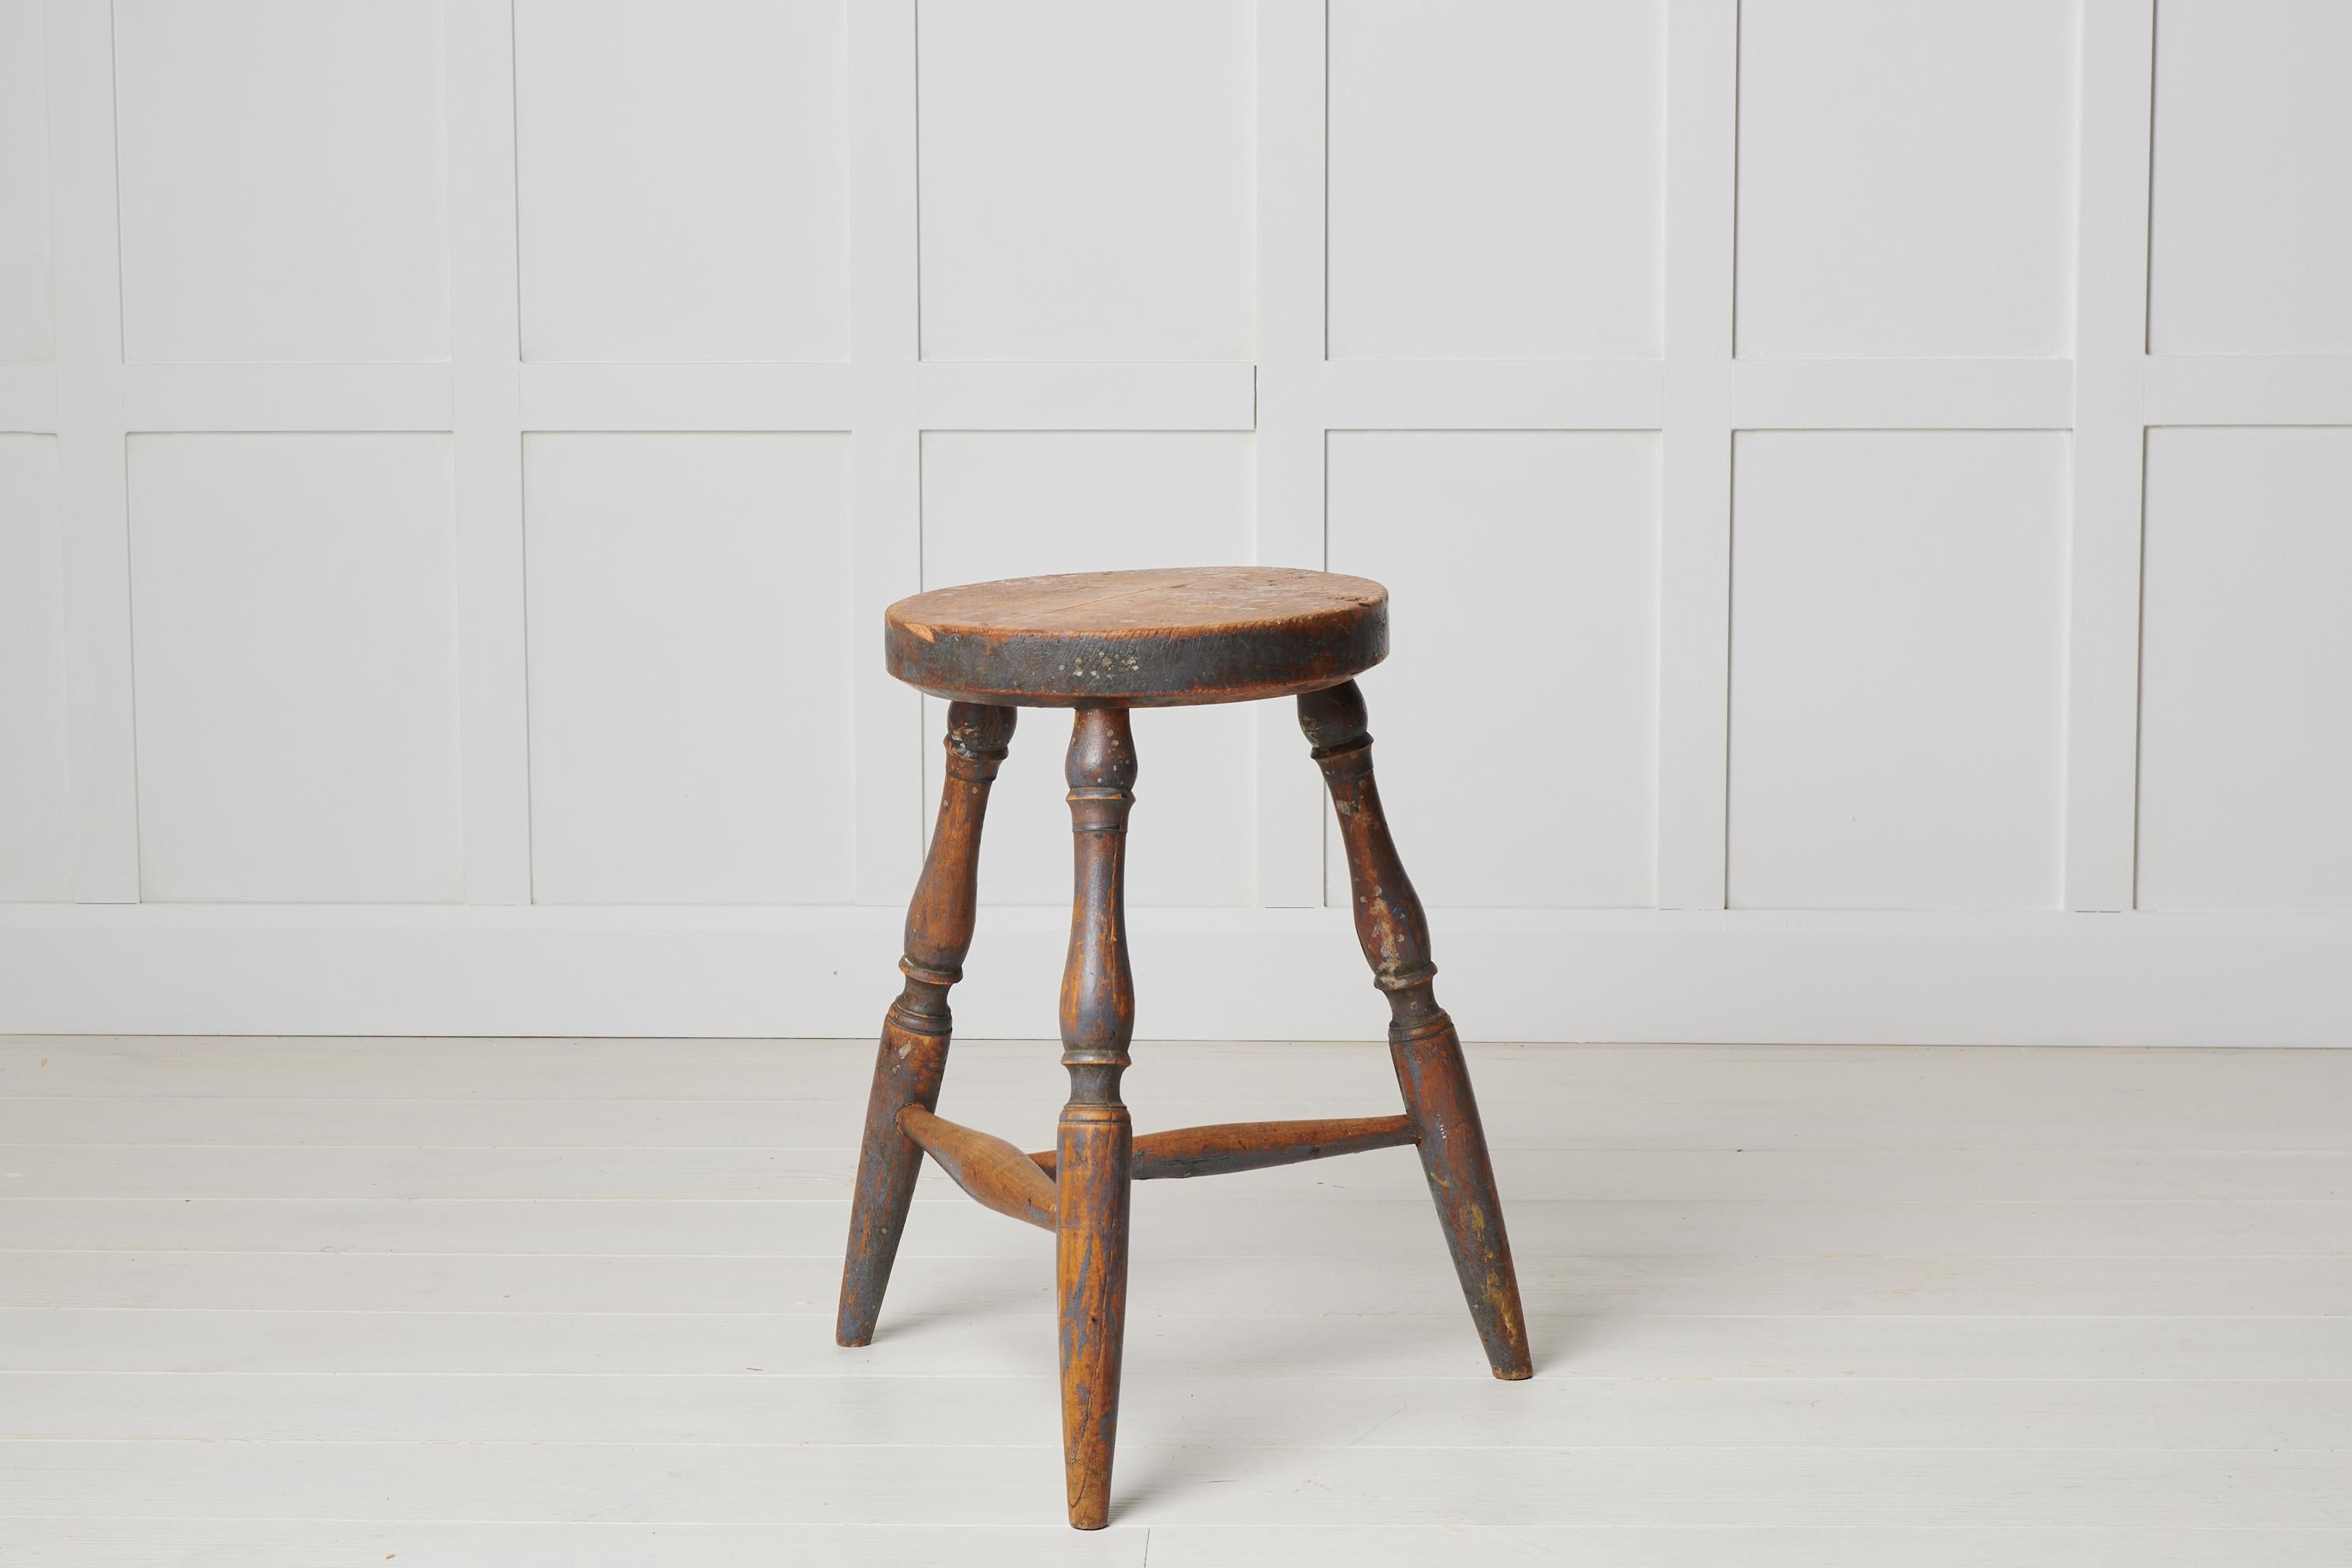 Hand-Crafted Antique Swedish Rustic Country Folk Art Stool For Sale